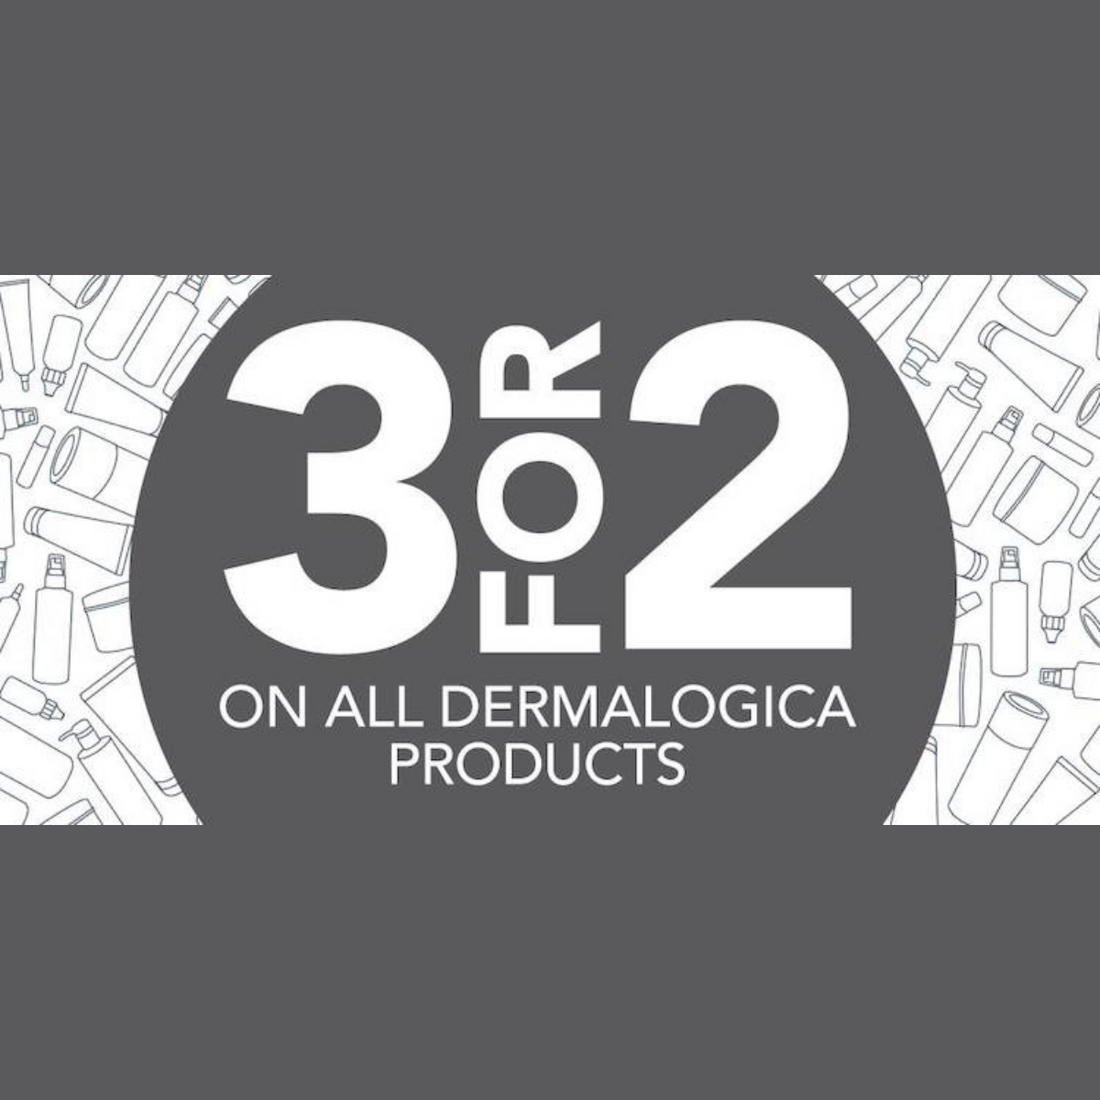 3 For 2 on ALL Dermalogica Products